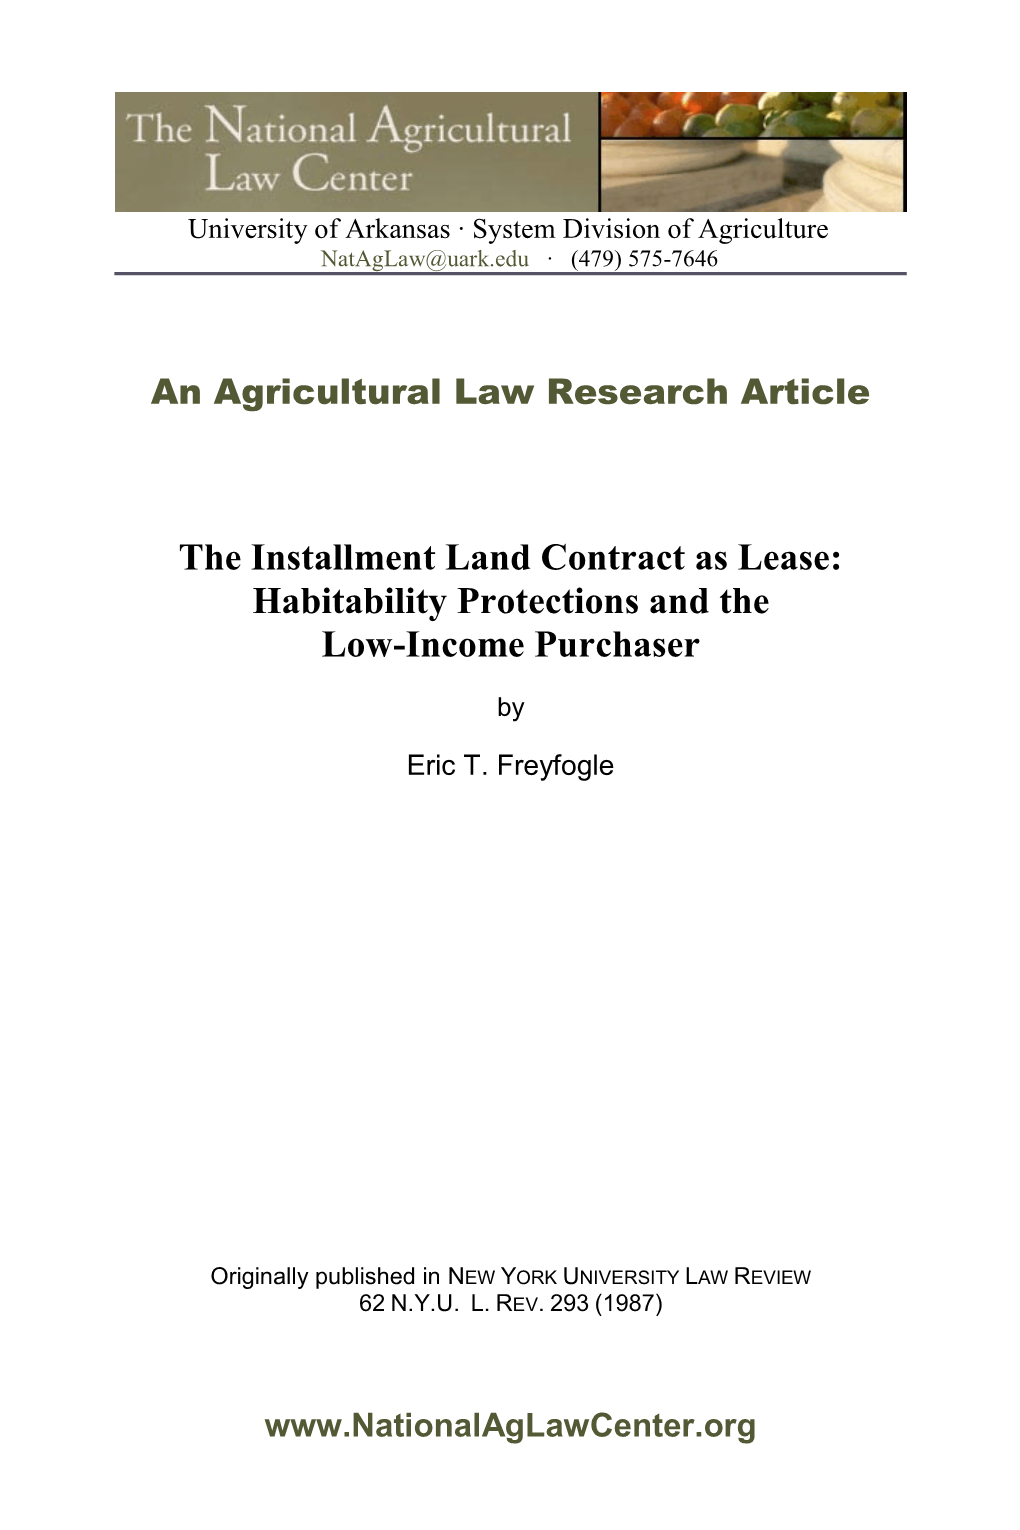 The Installment Land Contract As Lease: Habitability Protections and the Low-Income Purchaser